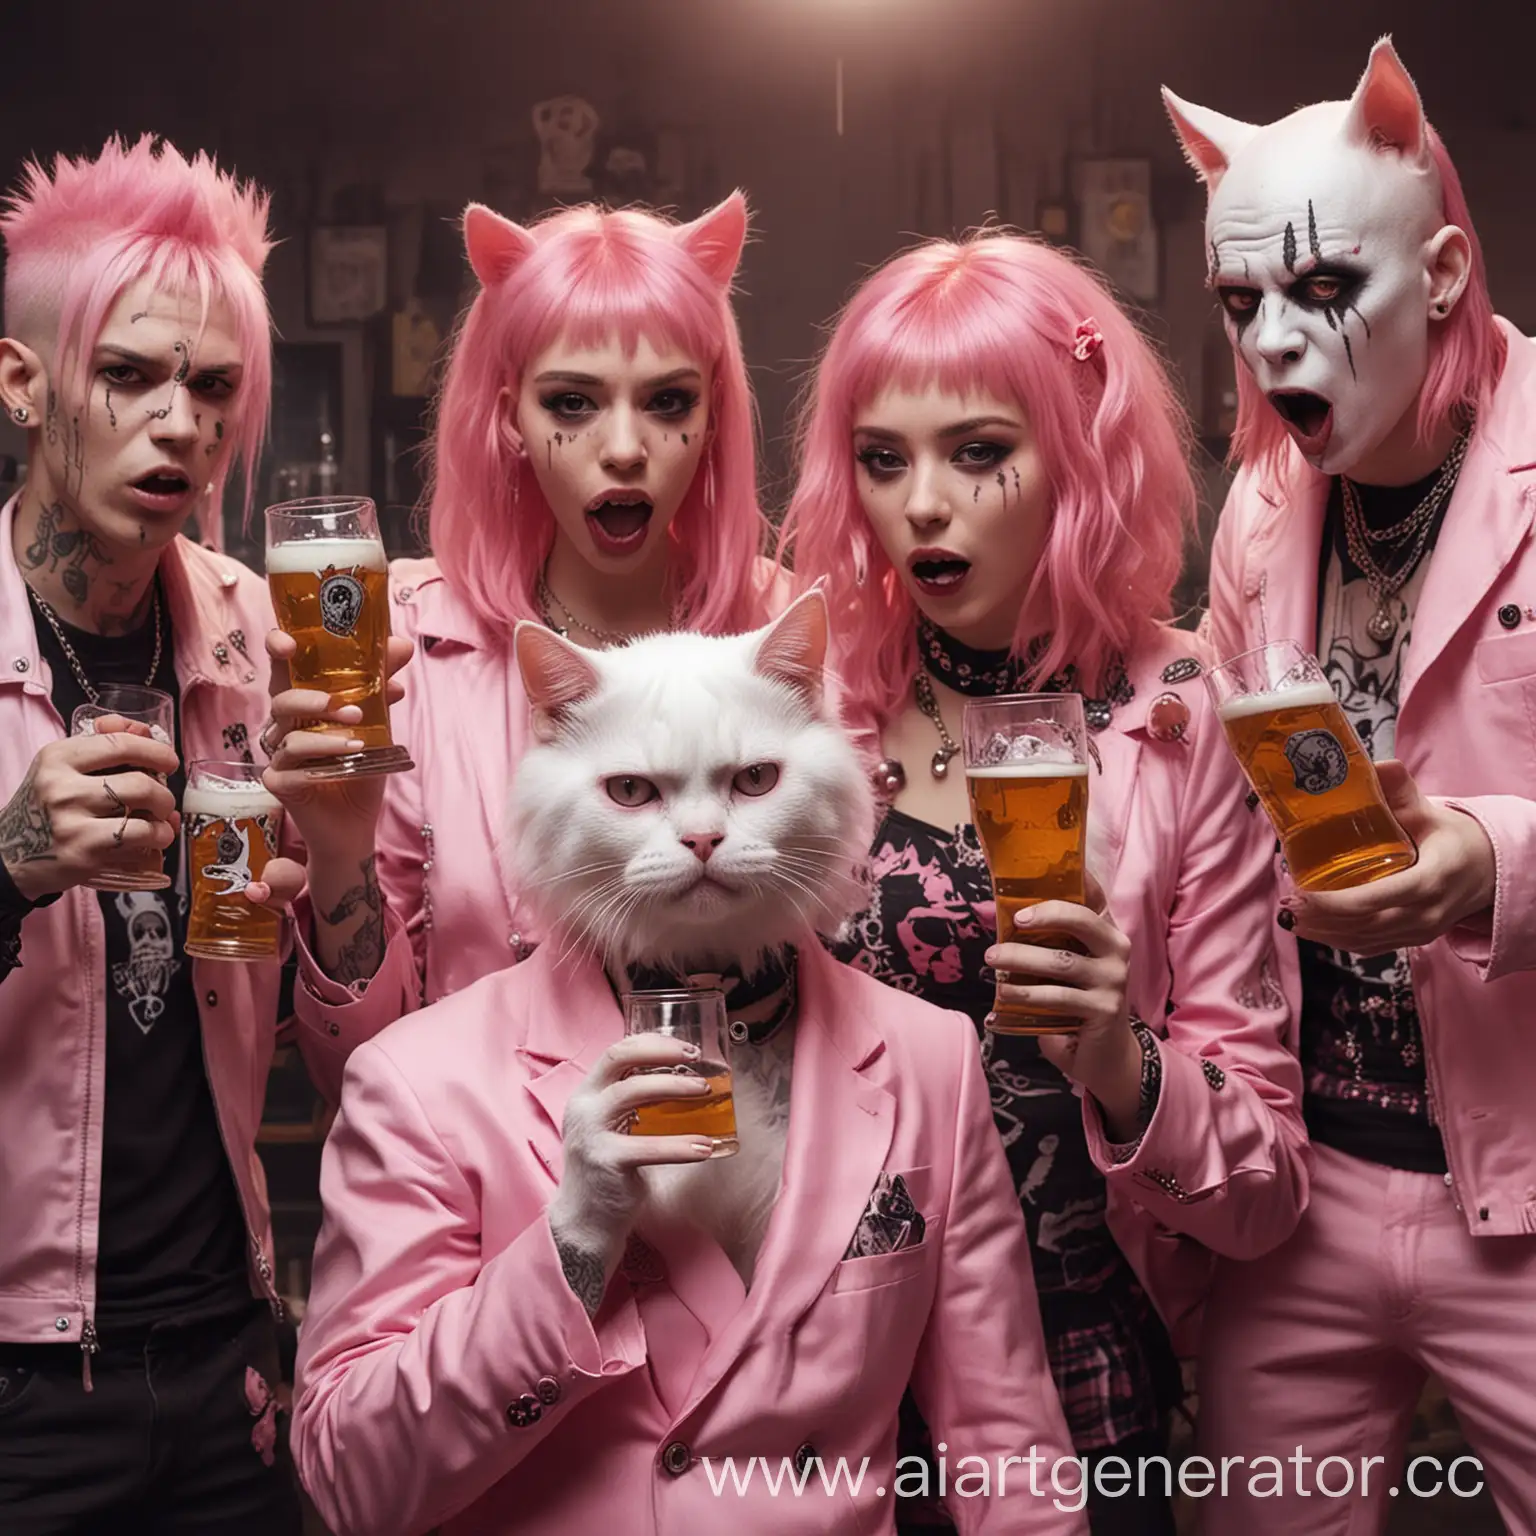 Group-of-Punk-Friends-Enjoying-Beers-with-Unique-Pet-and-Emotional-Moments